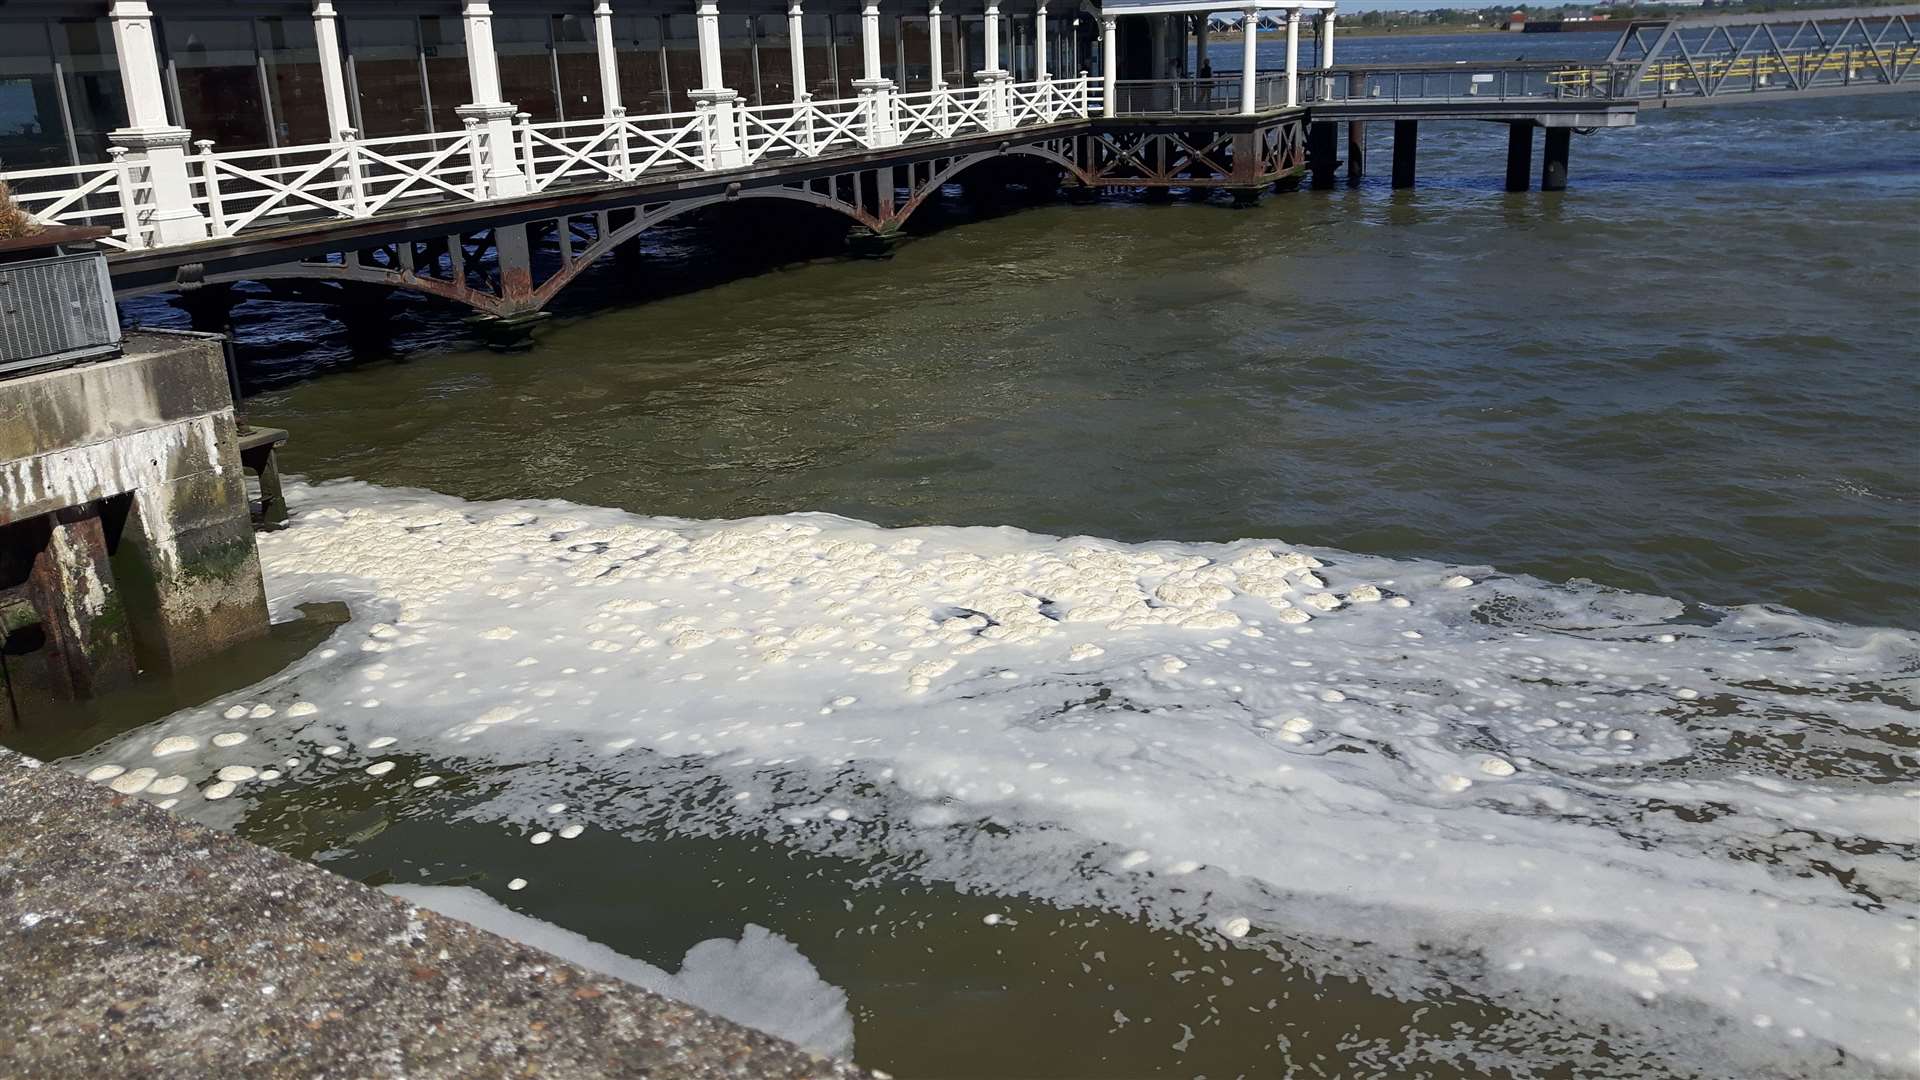 Foam at the side of the river near Gravesend (10273205)